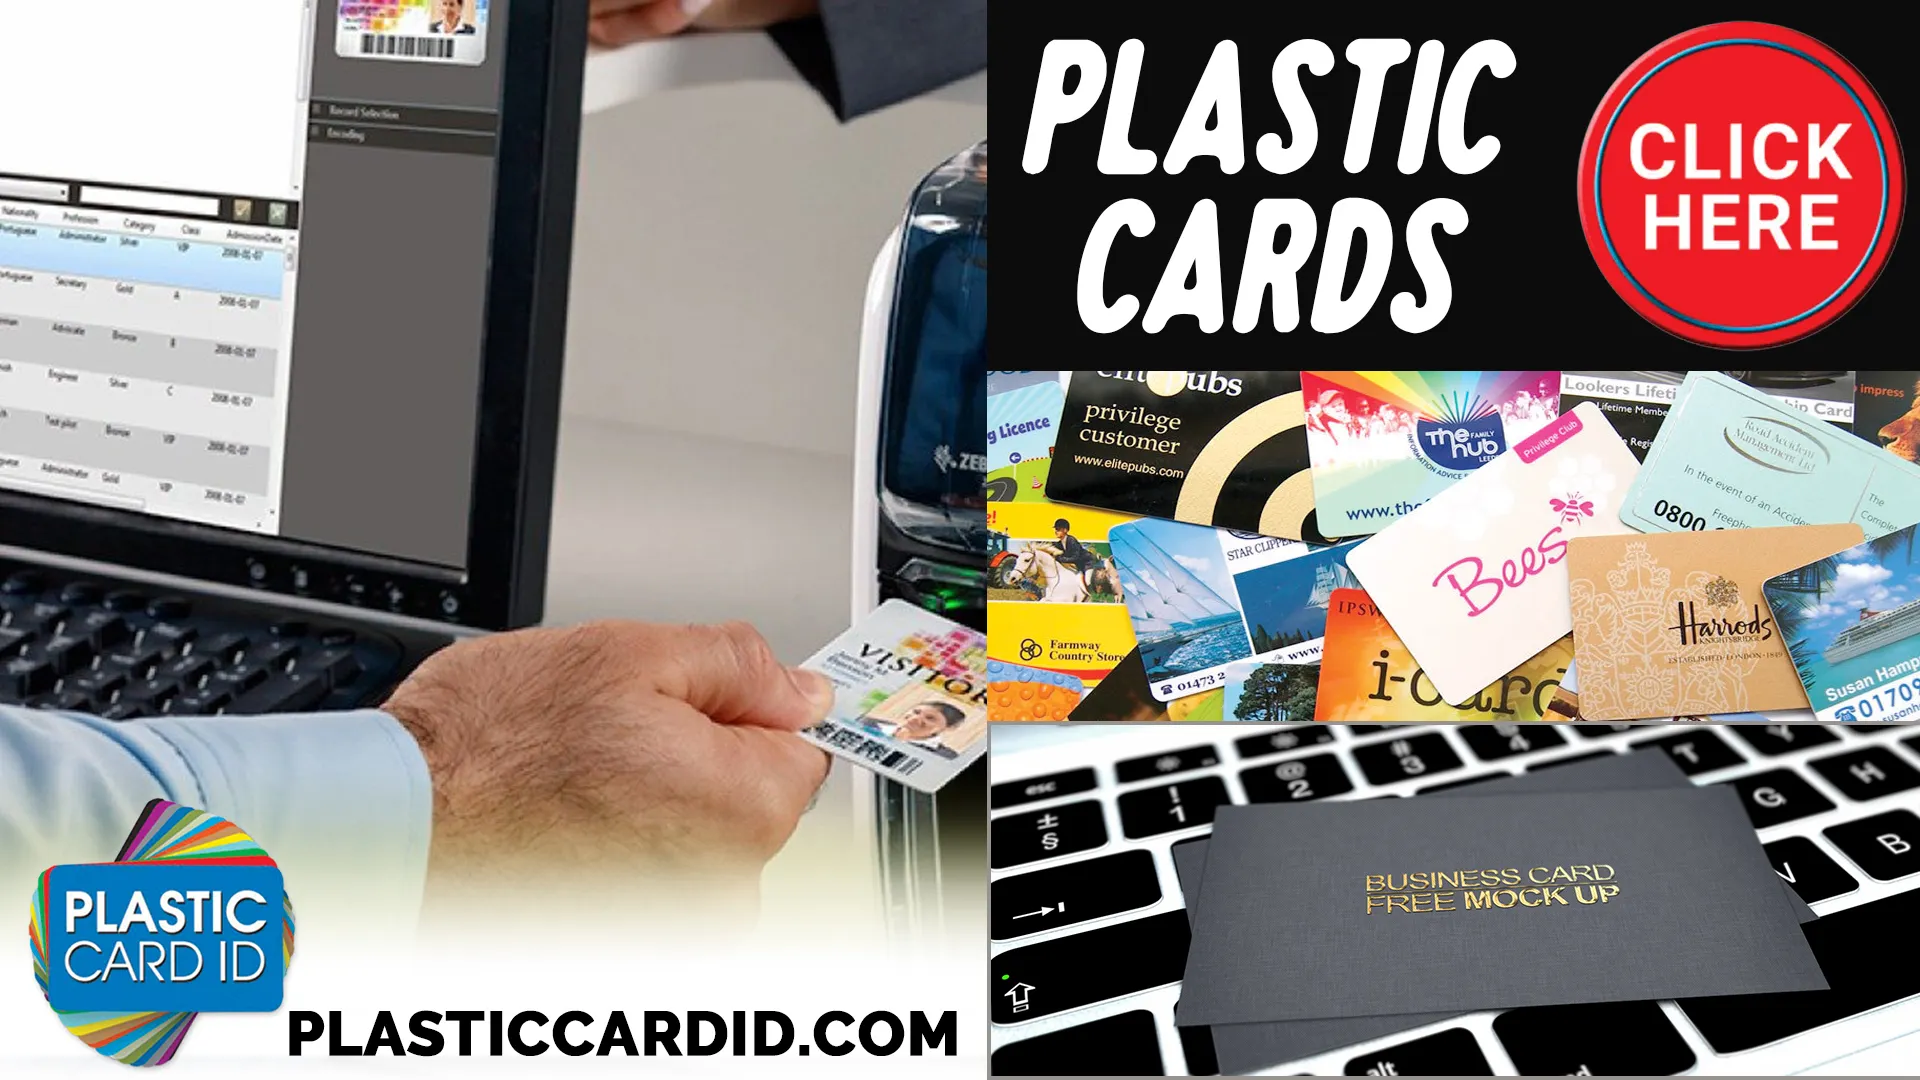 Welcome to Plastic Card ID




: Where Feedback Fuels Our Card Service Innovations